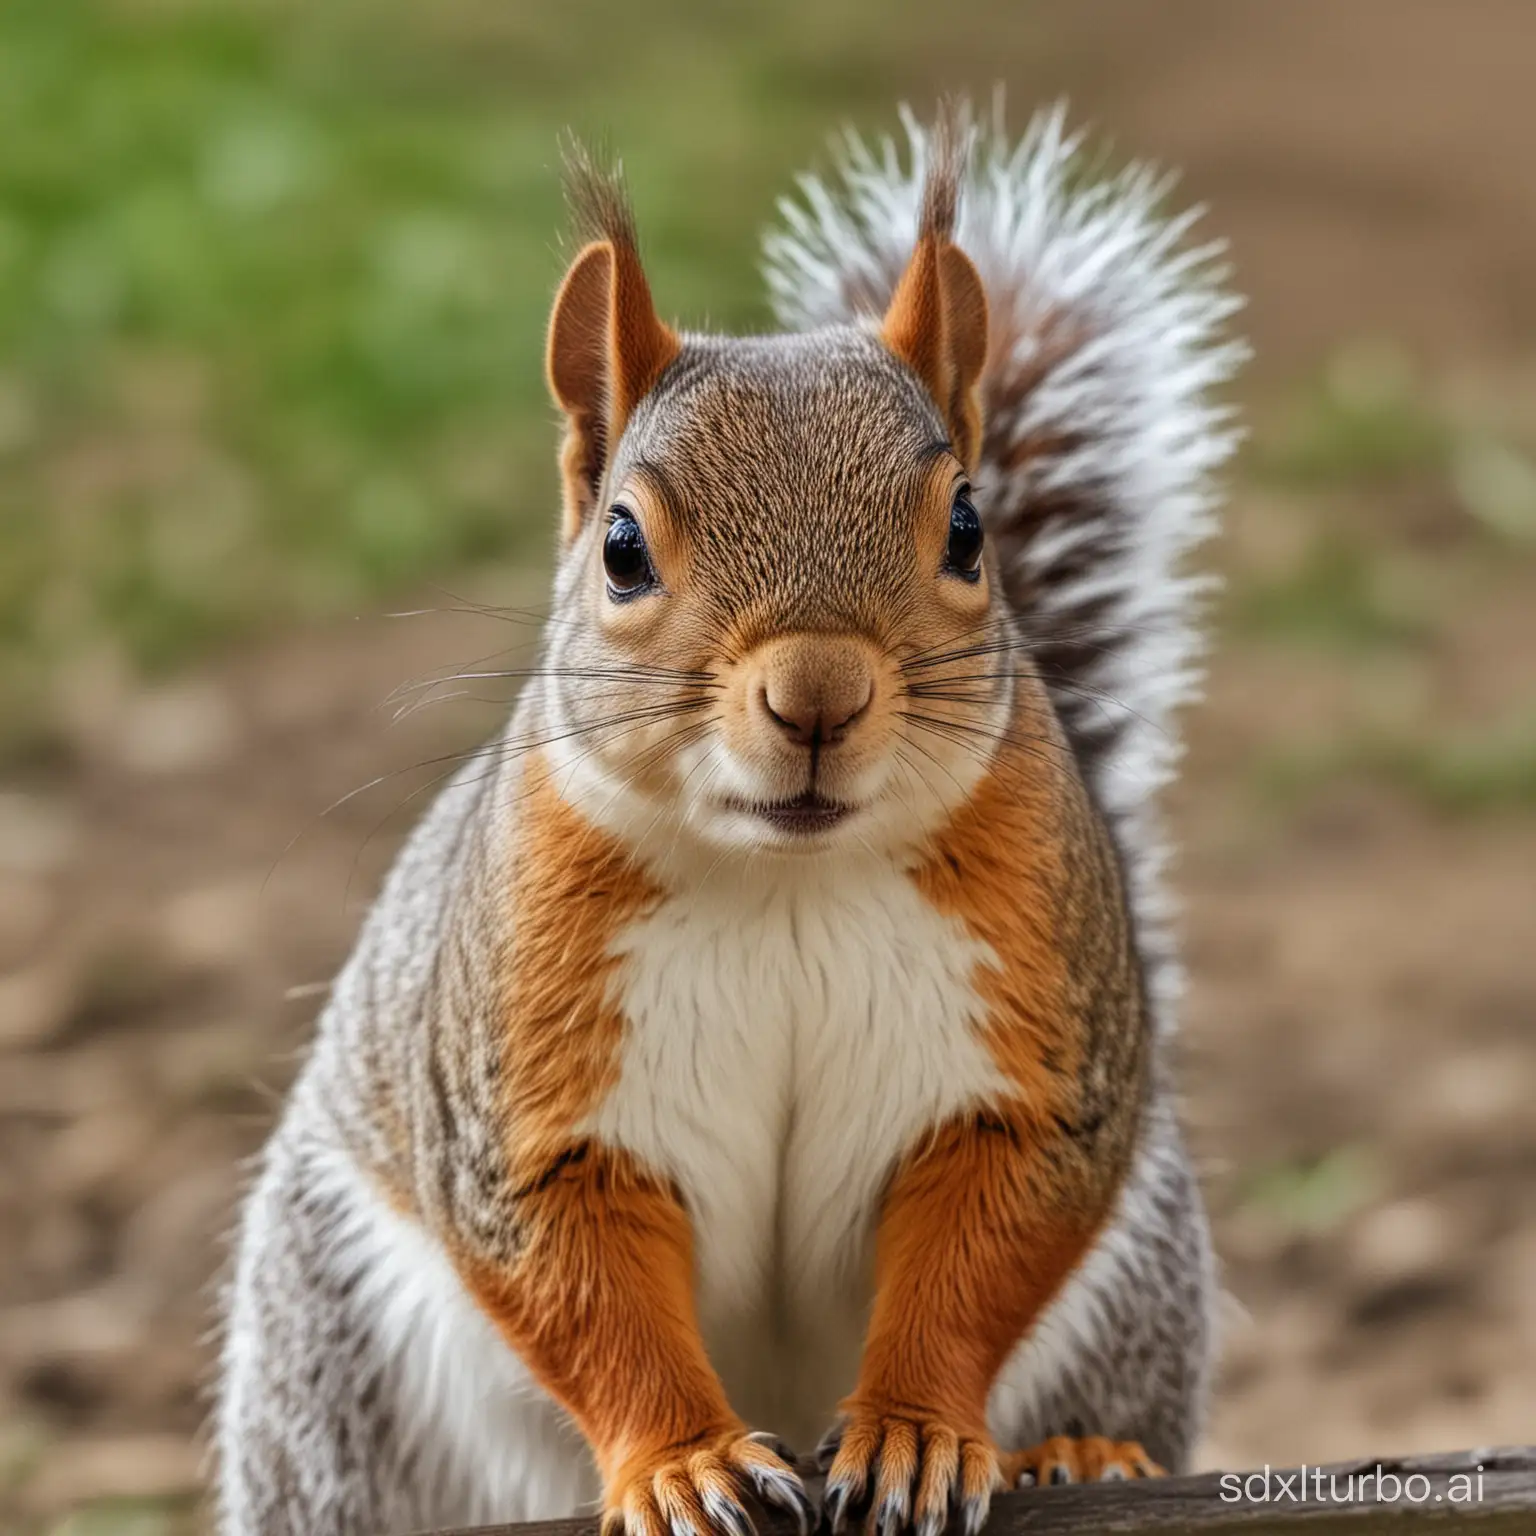 Portrait-of-a-Playful-Squirrel-in-a-Park-Capturing-Natures-Charms-Through-Photography